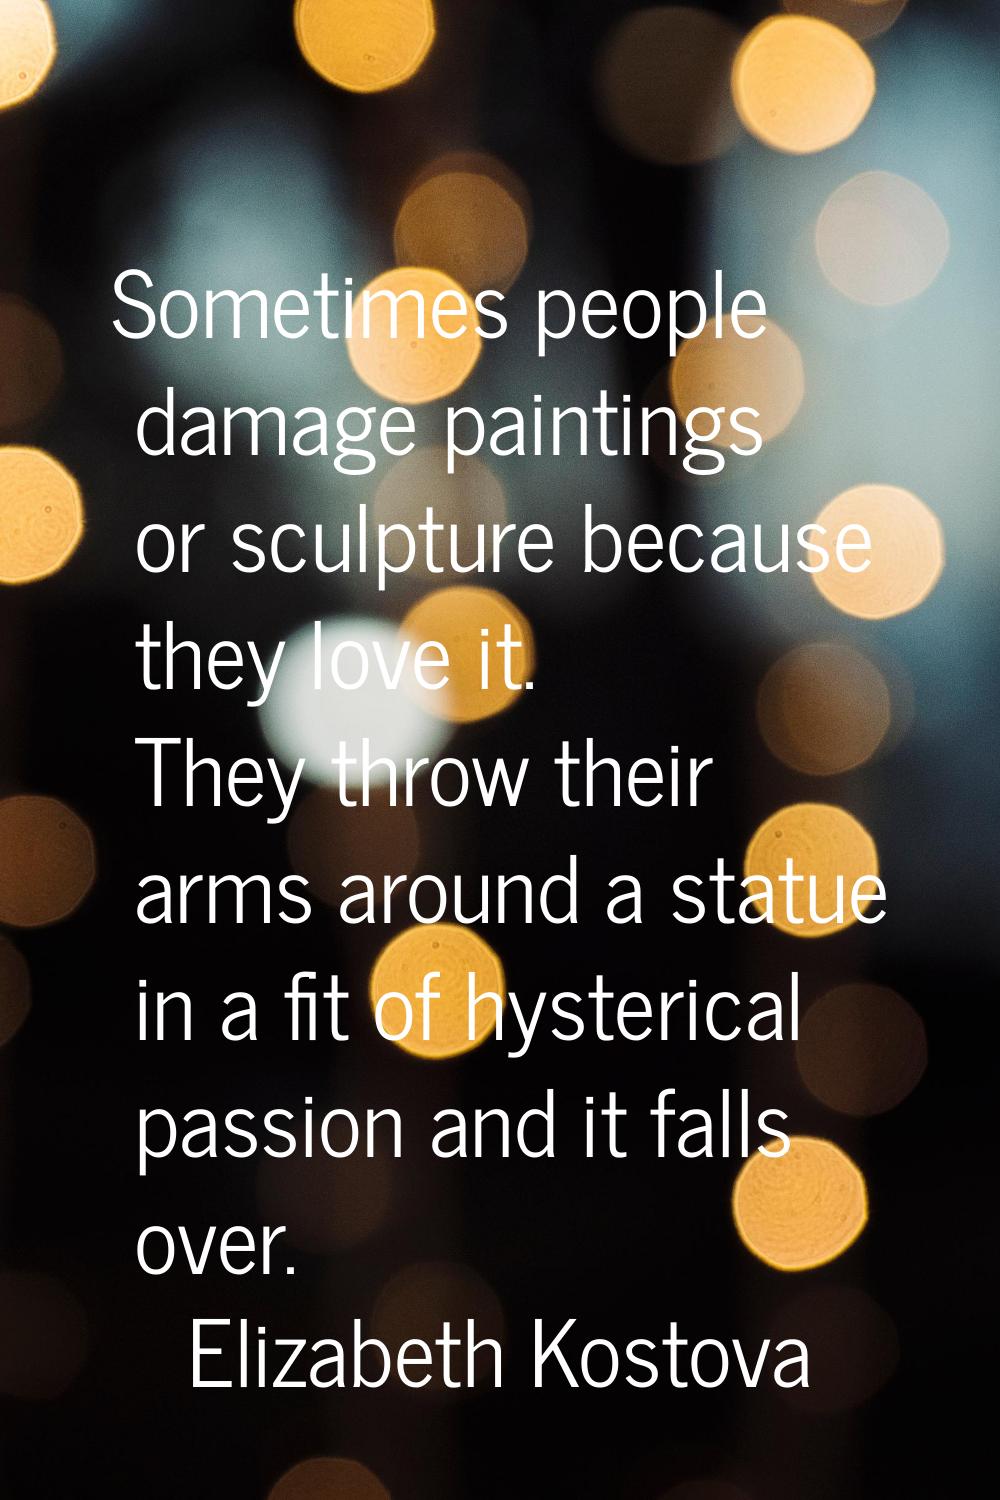 Sometimes people damage paintings or sculpture because they love it. They throw their arms around a